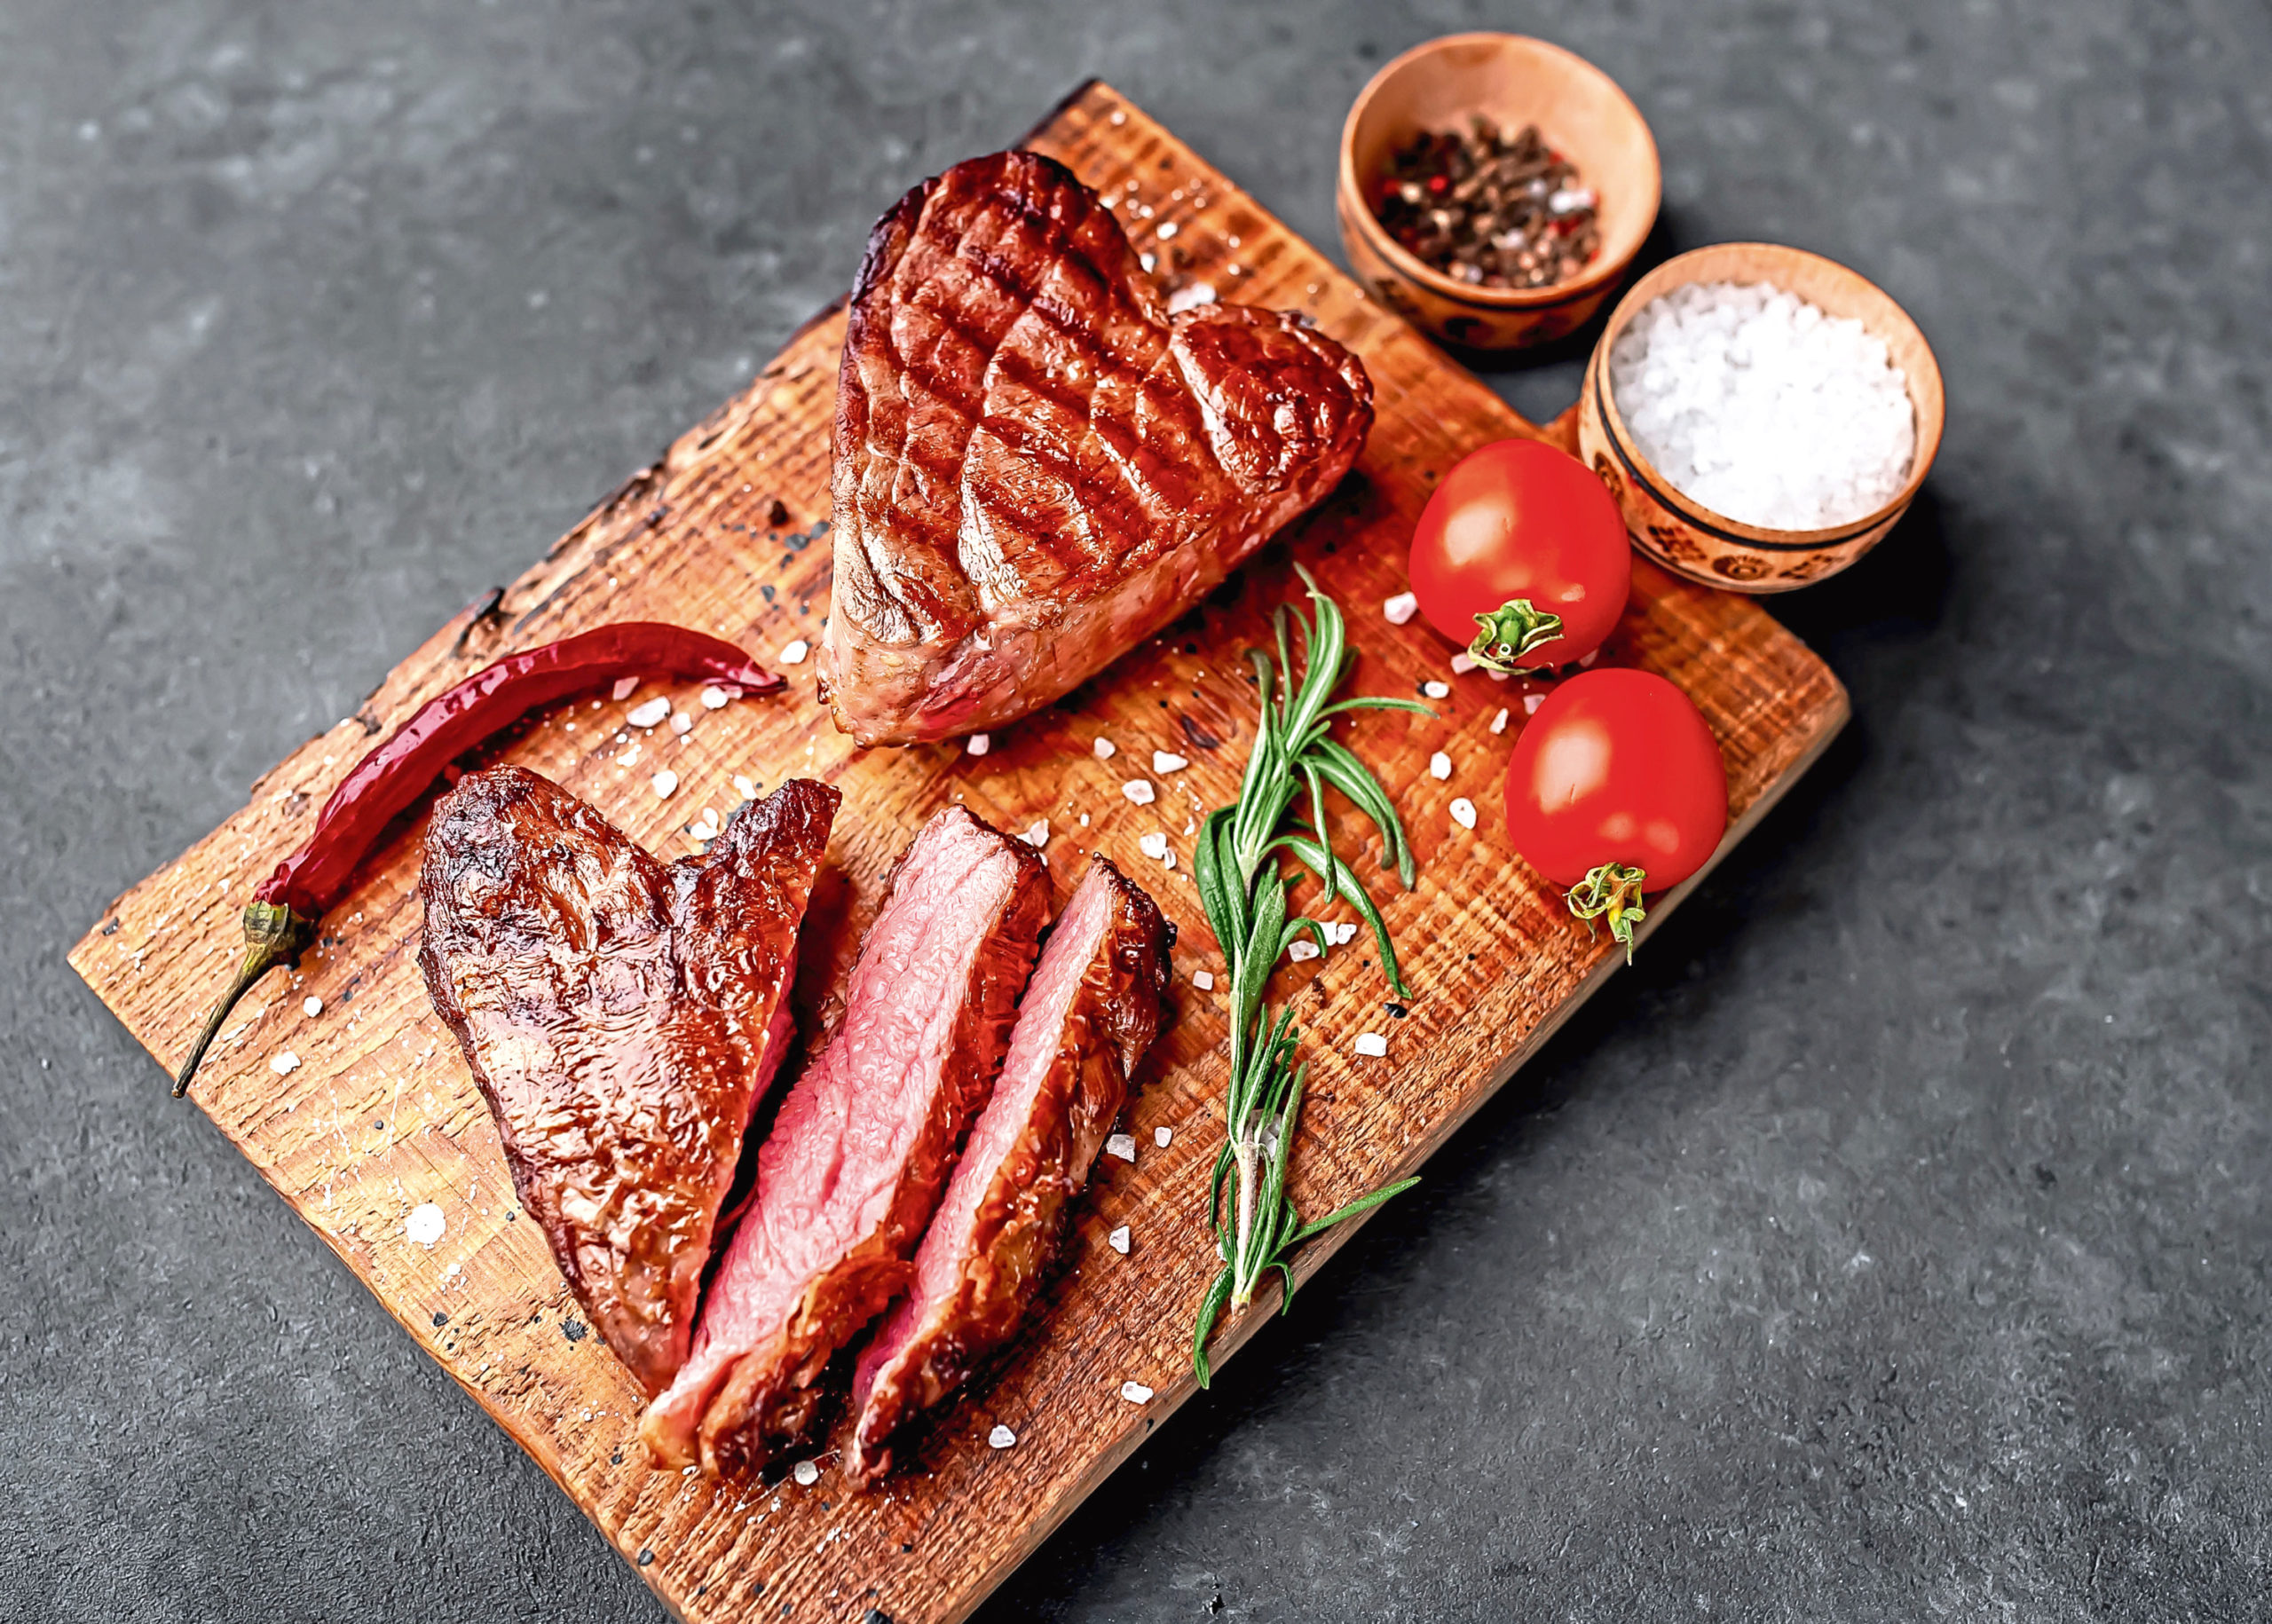 Red meat sales on items such as steaks were up for this year’s Valentine’s Day, the latest figures have shown.